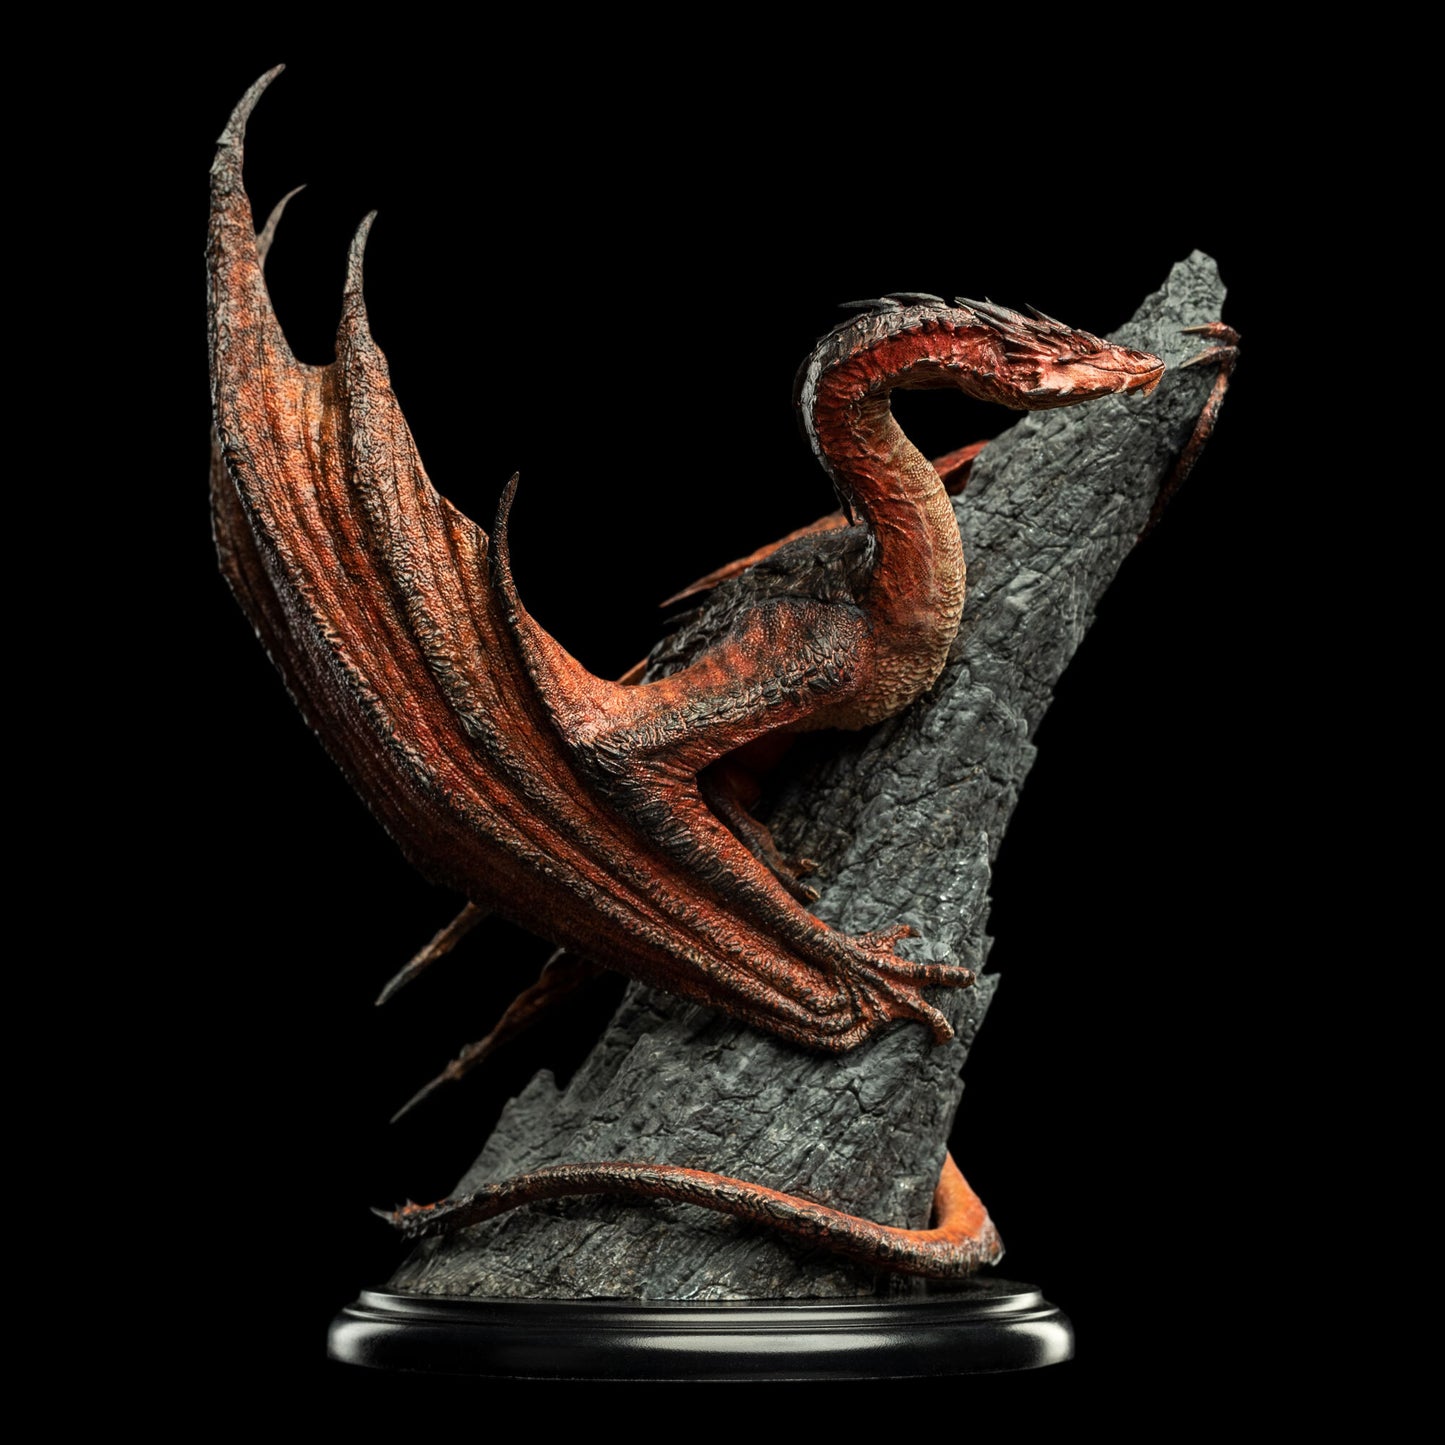 Smaug The Magnificent Mini Statue (Lord of the Rings) by Weta Workshop